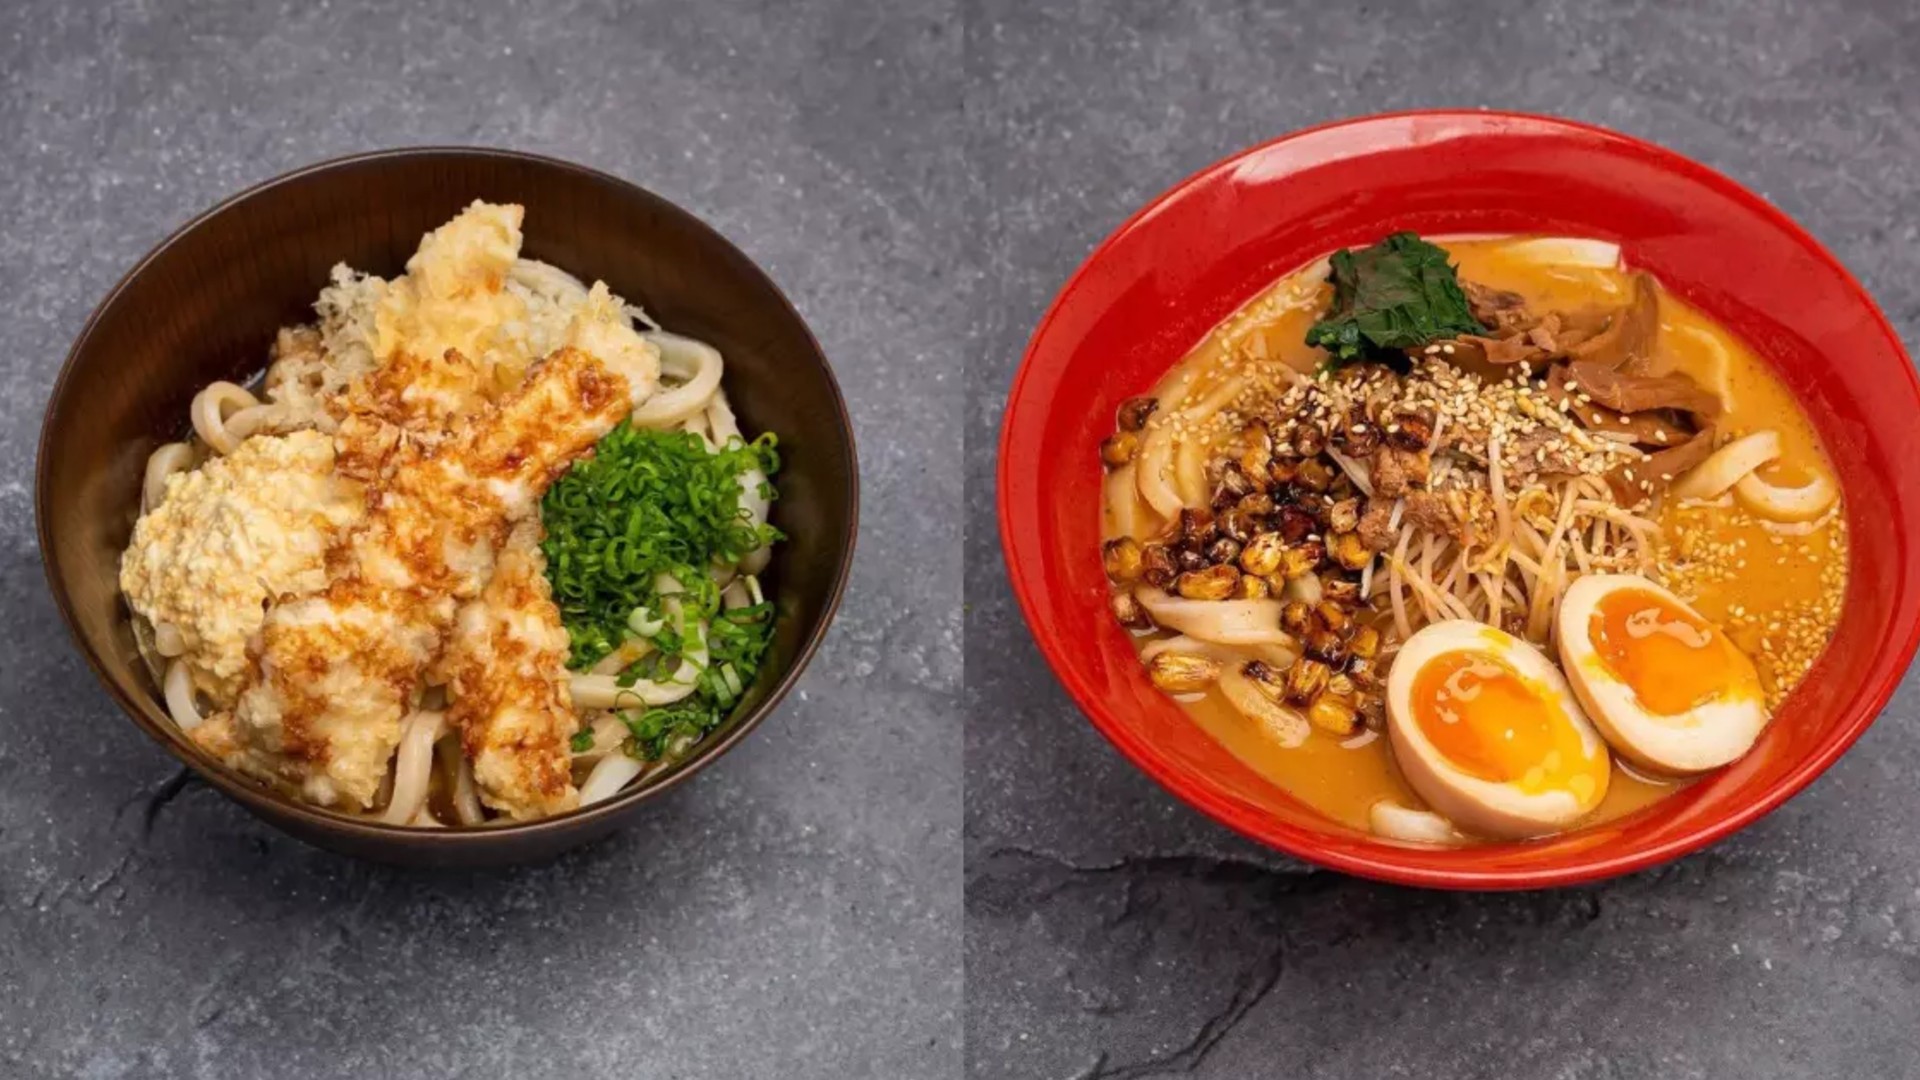 Maru Udon Serves The Best Udon Noodles In Town With Dishes Starting At AED 8